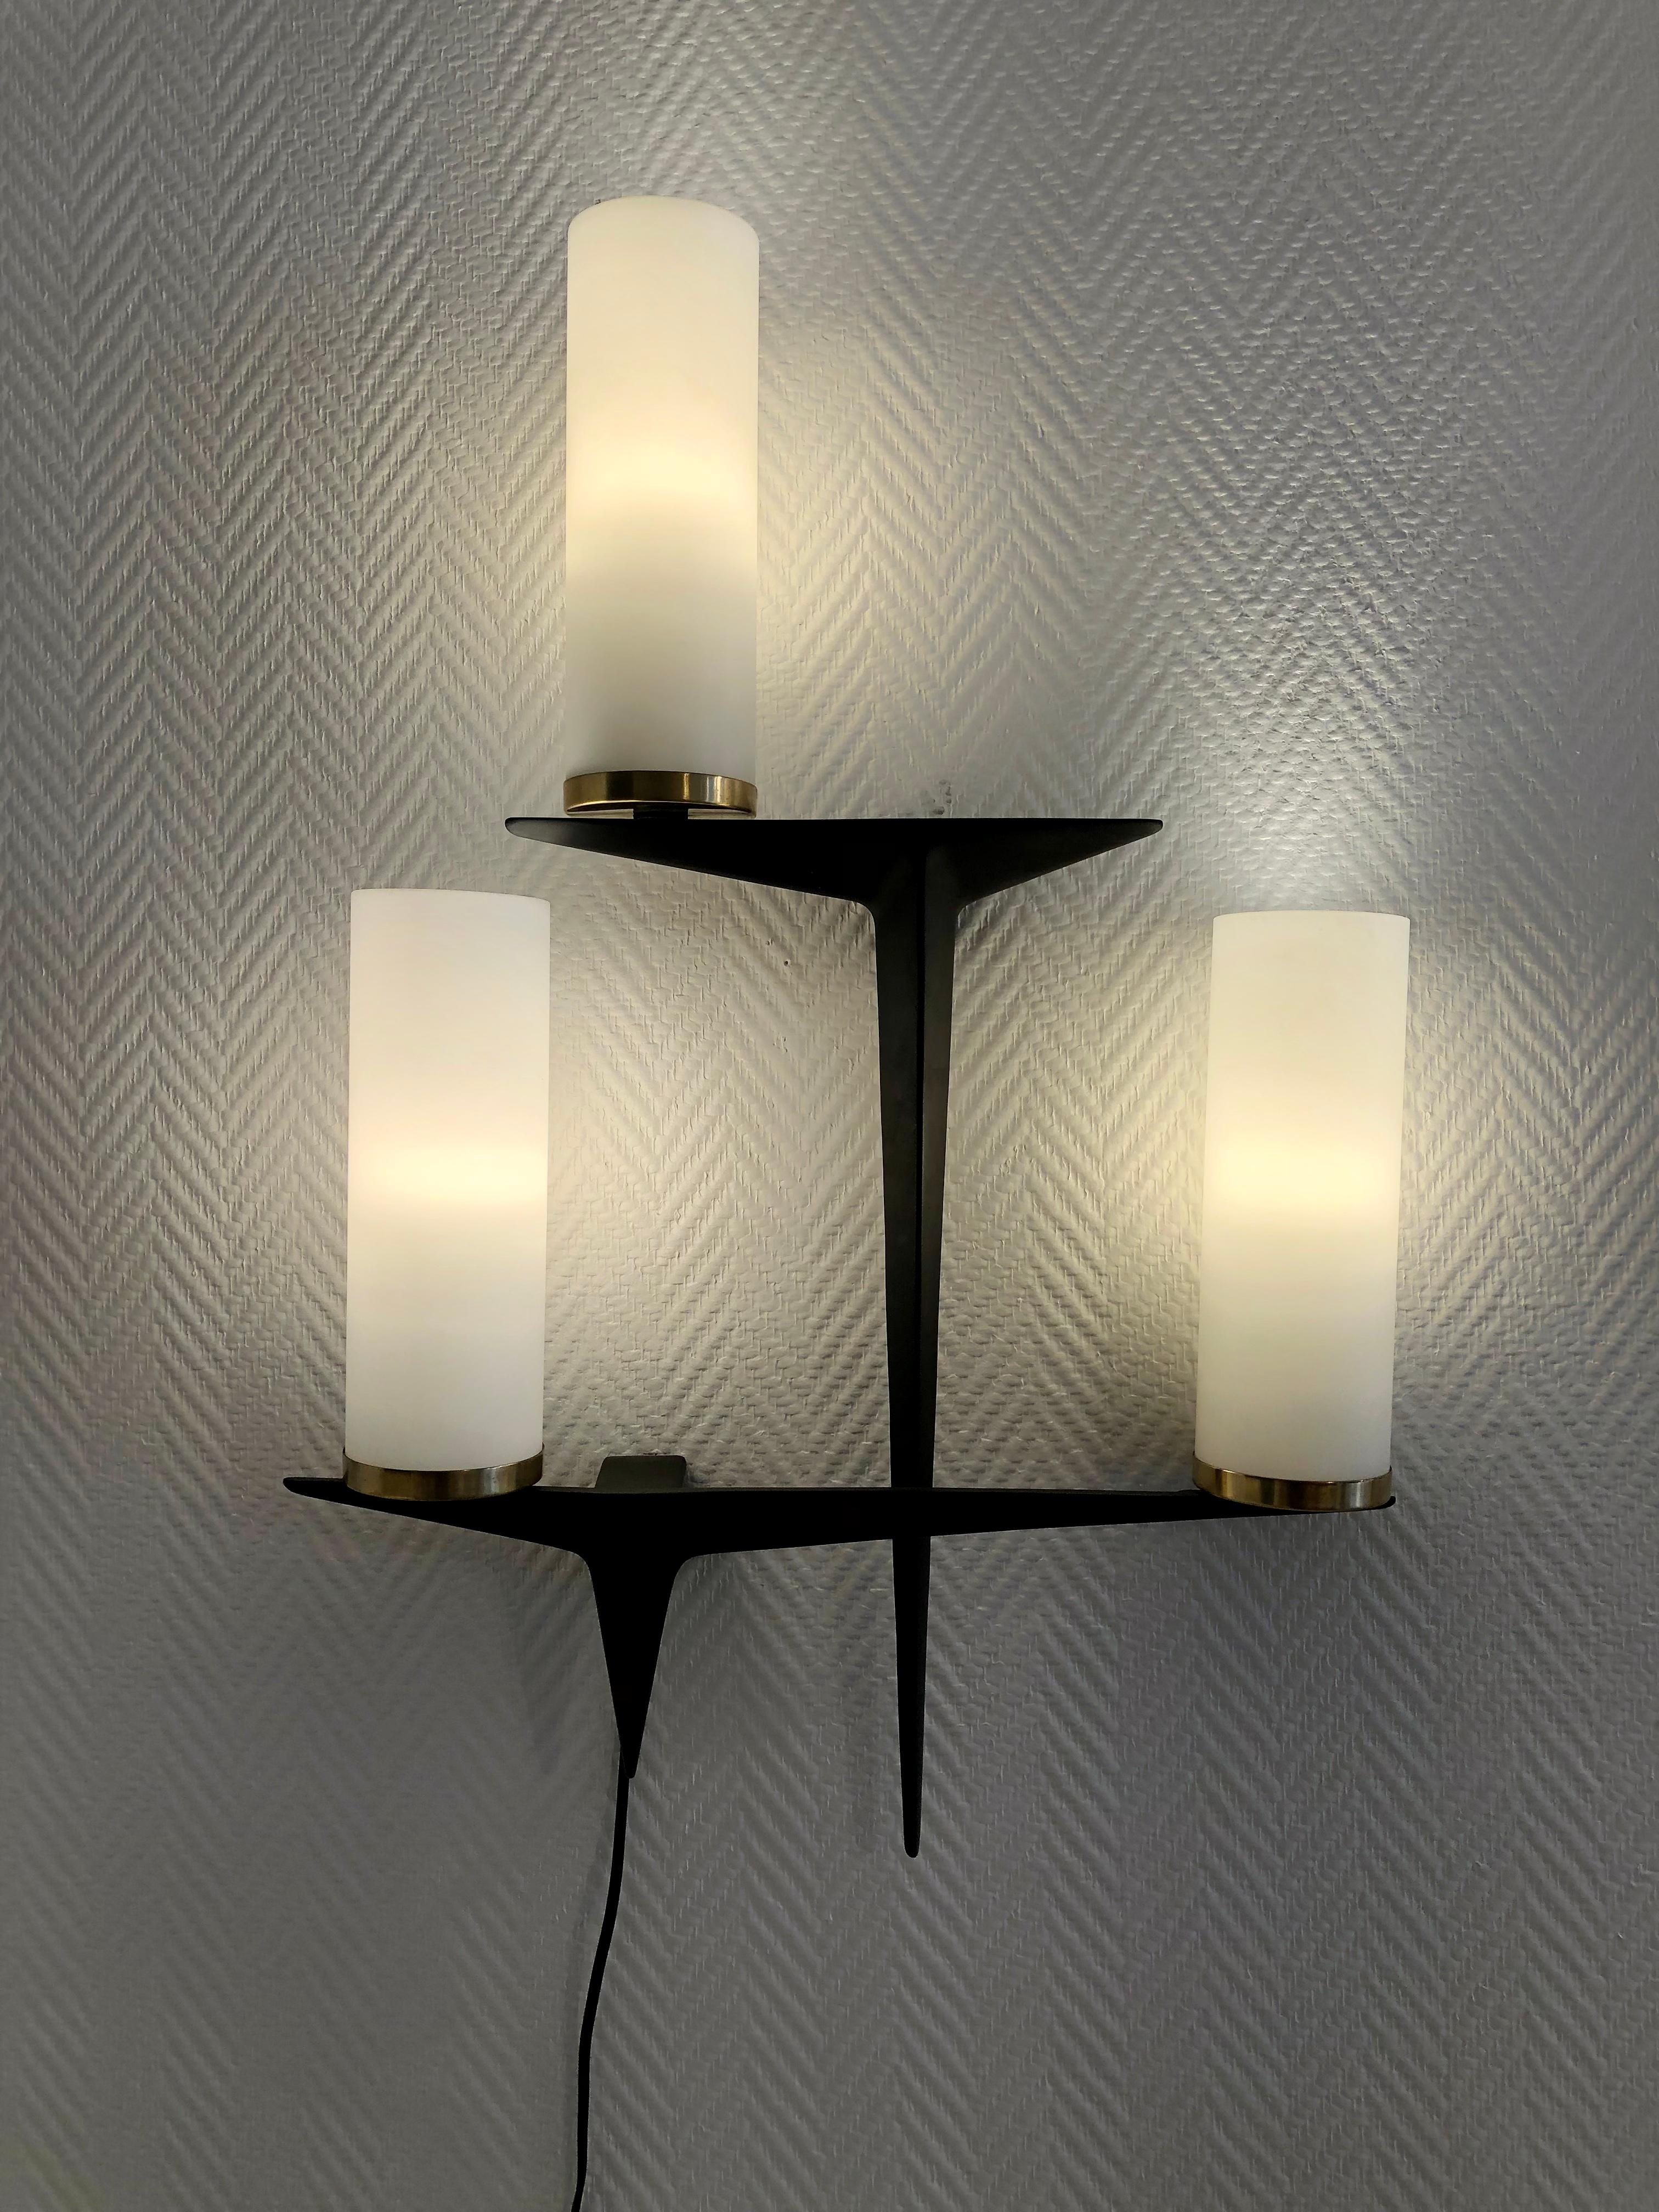 Mid-Century Modern Pair of Sconces by Maison Arlus, 1950 For Sale